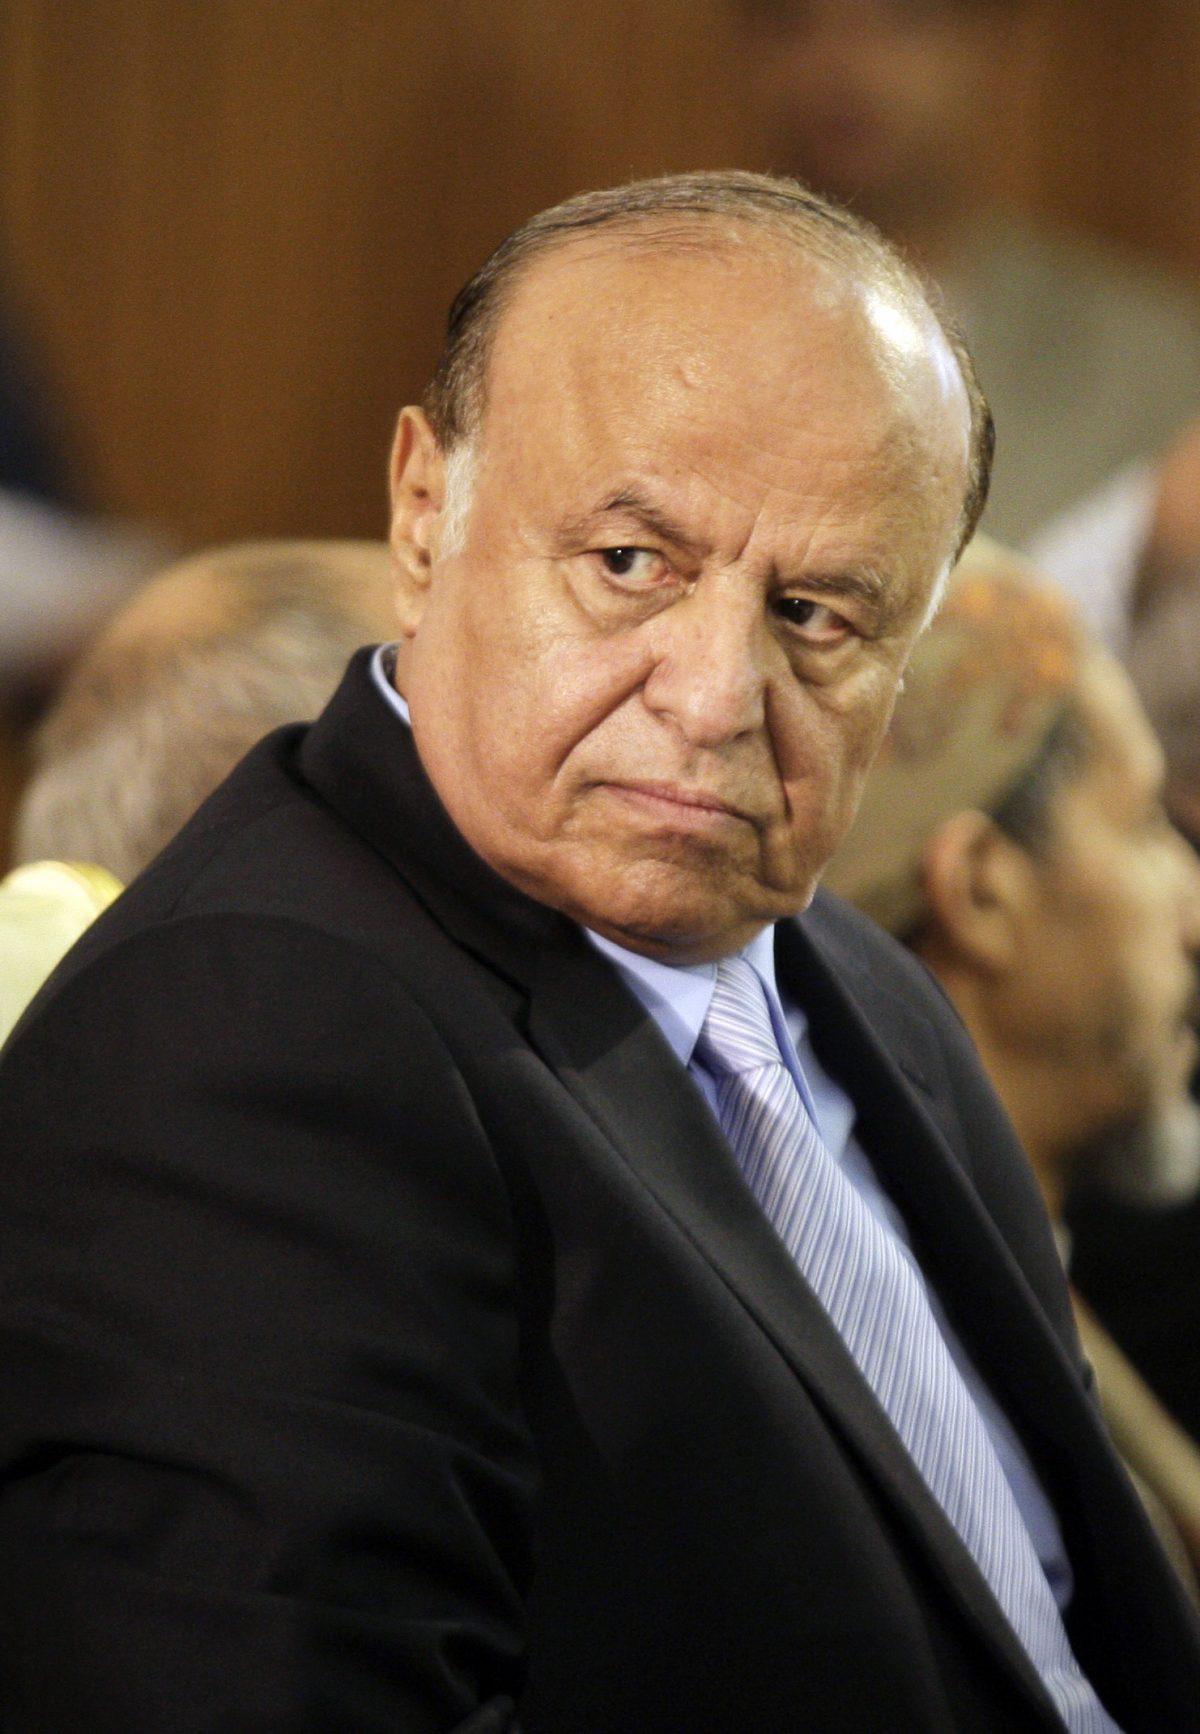 In this Feb. 7, 2012 file photo, Yemen's then Vice President Abed Rabbo Mansour Hadi attends an inauguration ceremony for his presidential election campaign, in Sanaa, Yemen. (AP Photo/Hani Mohammed, File)